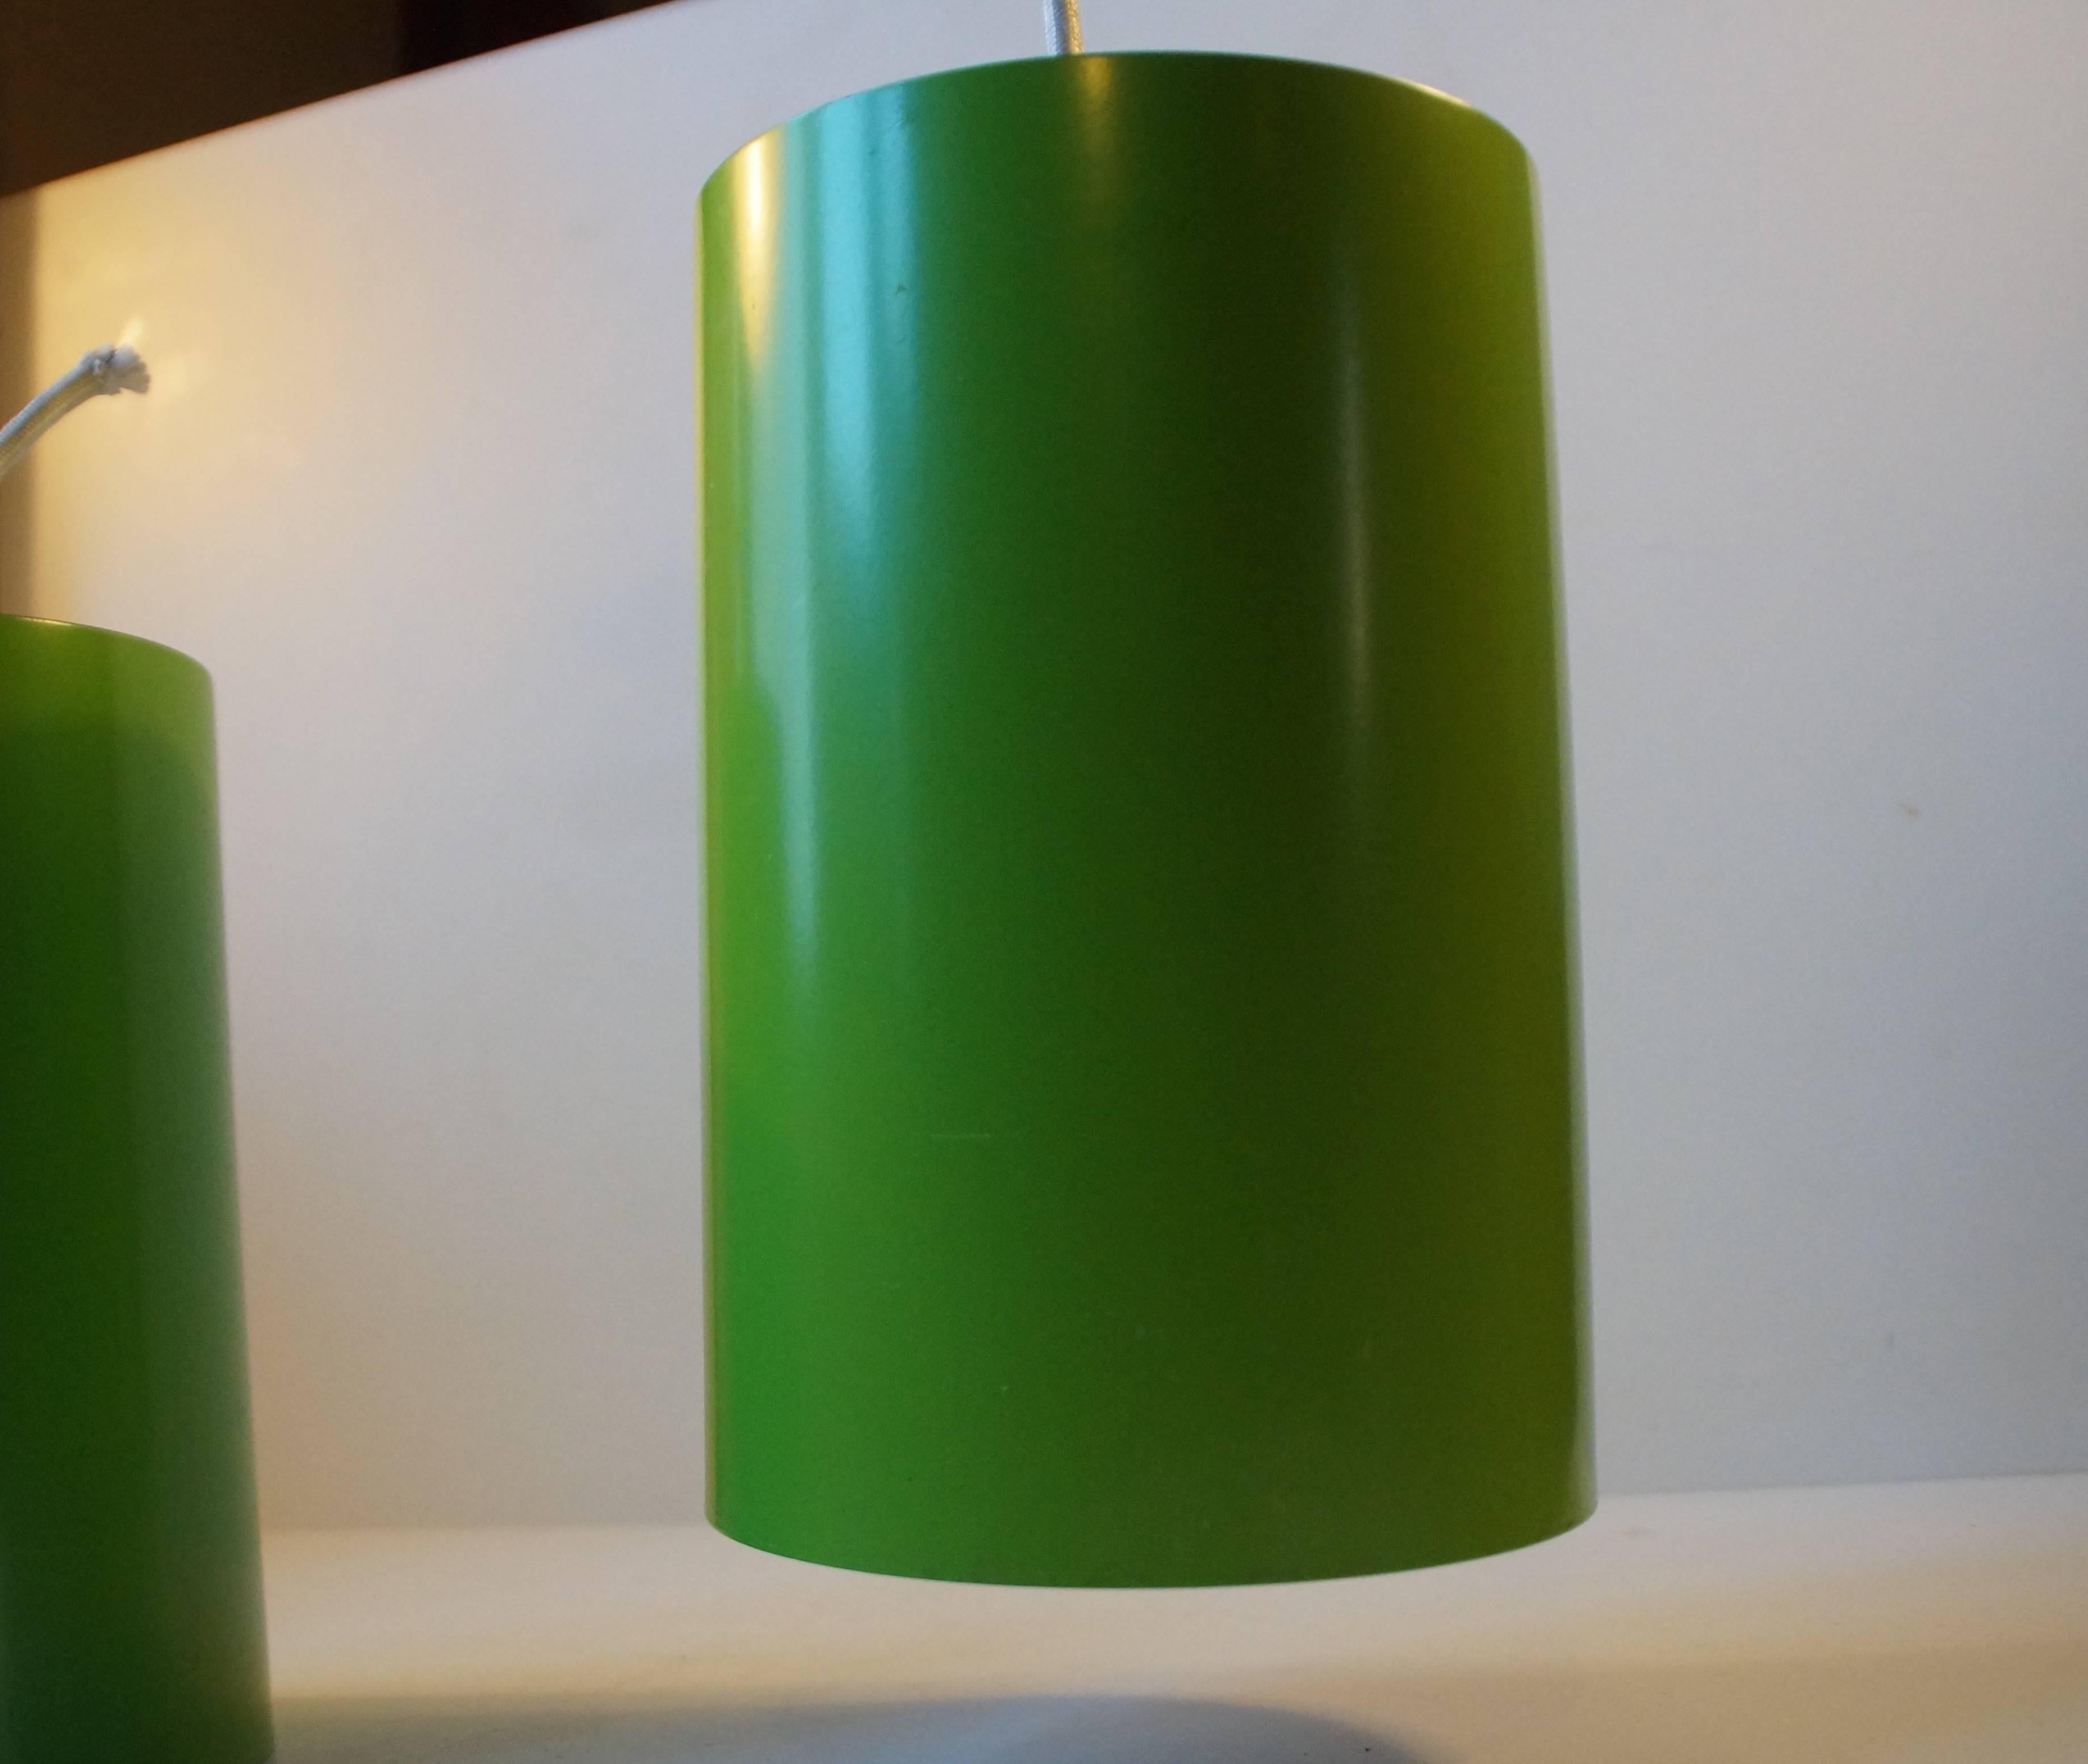 A pair of Green Pendants designed by Eila and John Meiling and manufactured by Louis Poulsen in the 1970s. Model number: 16512. Both with the old sticker from Louis Poulsen to the inside. Both in nice vintage condition with ware and patina